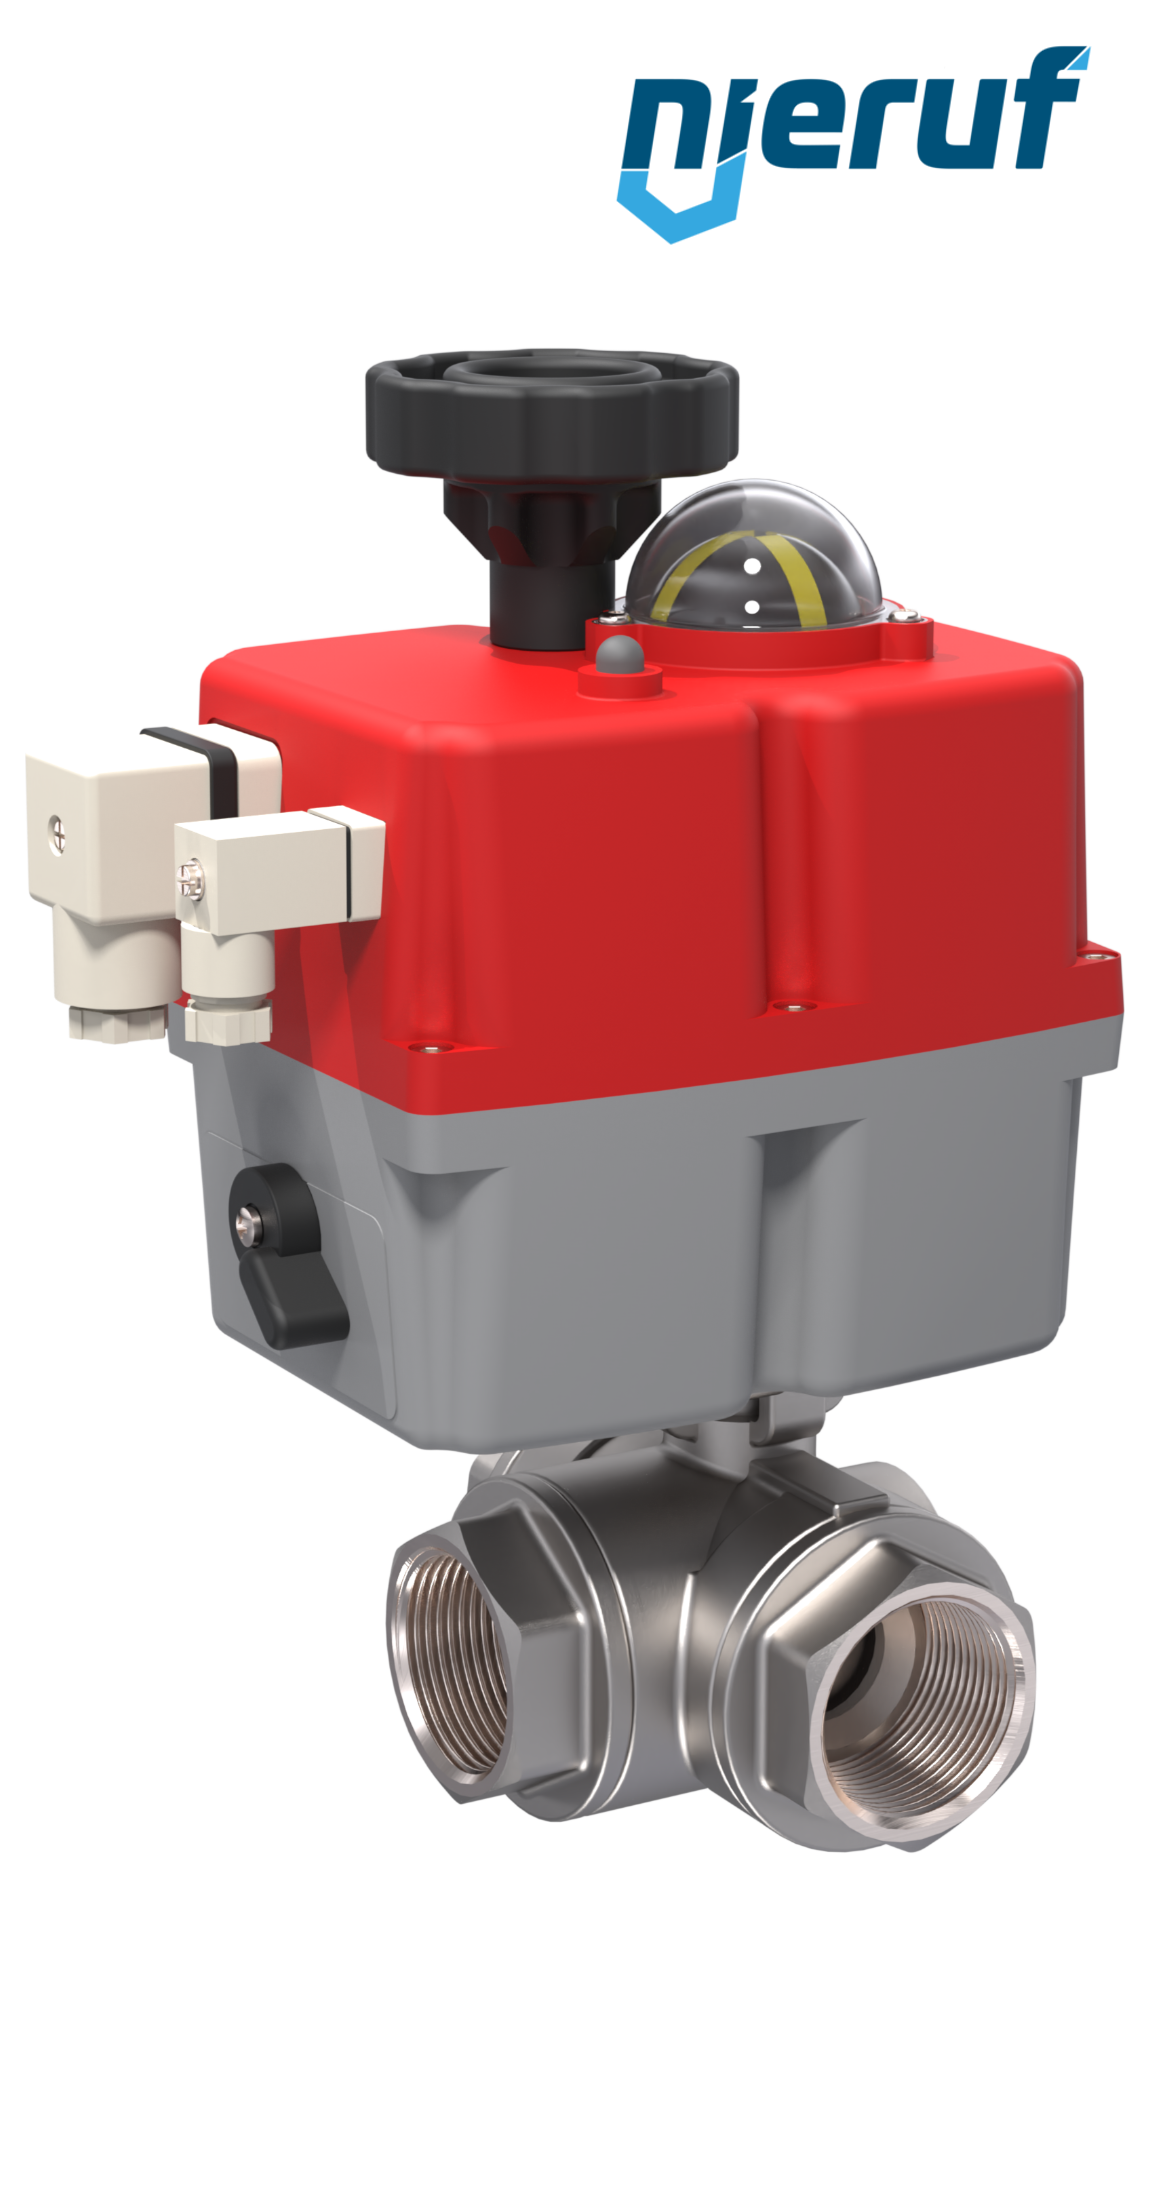 3 way automatic-ball valve 24-240V DN50 - 2" inch stainless steel reduced port design with L drilling